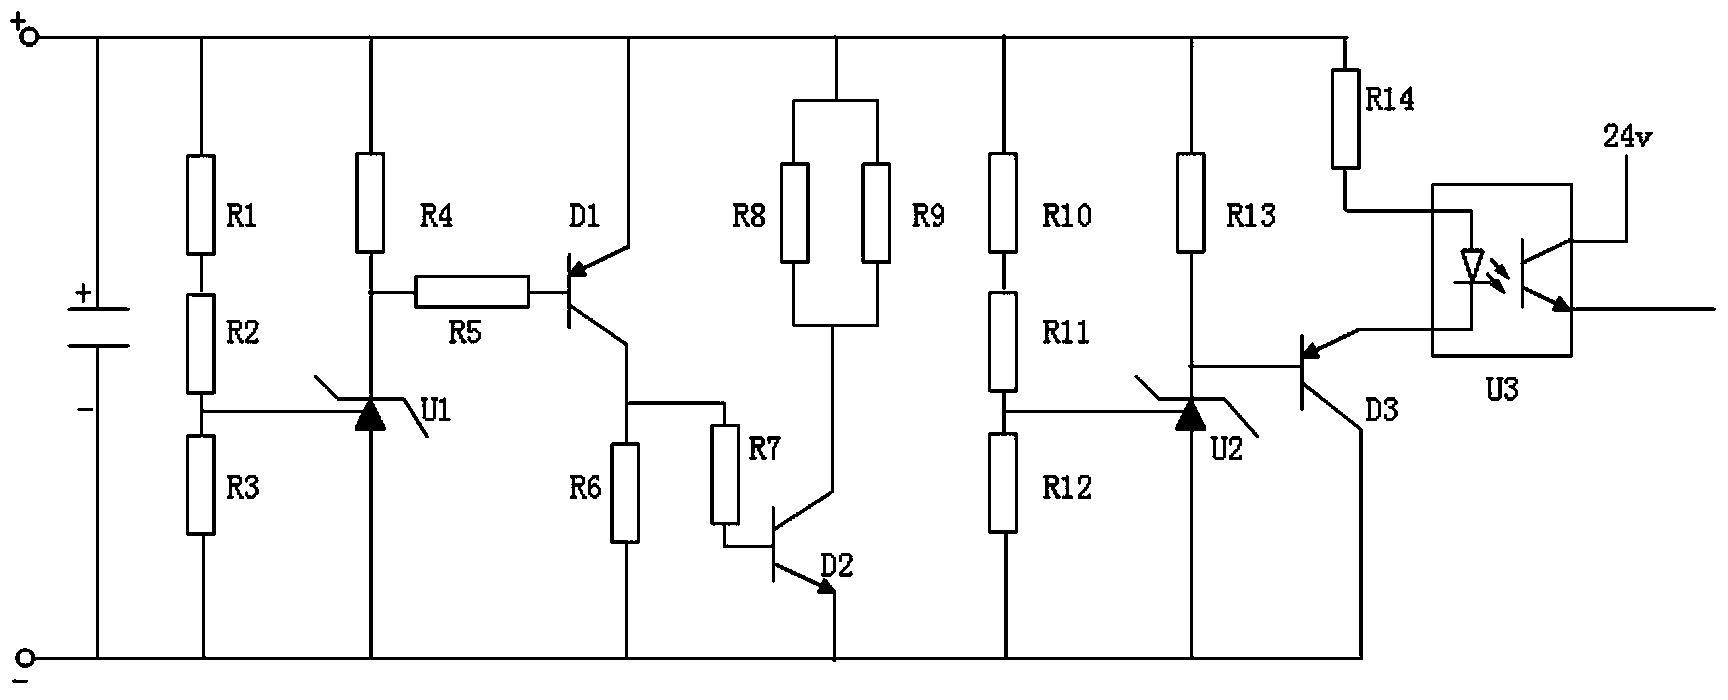 Super-capacitor energy storing device